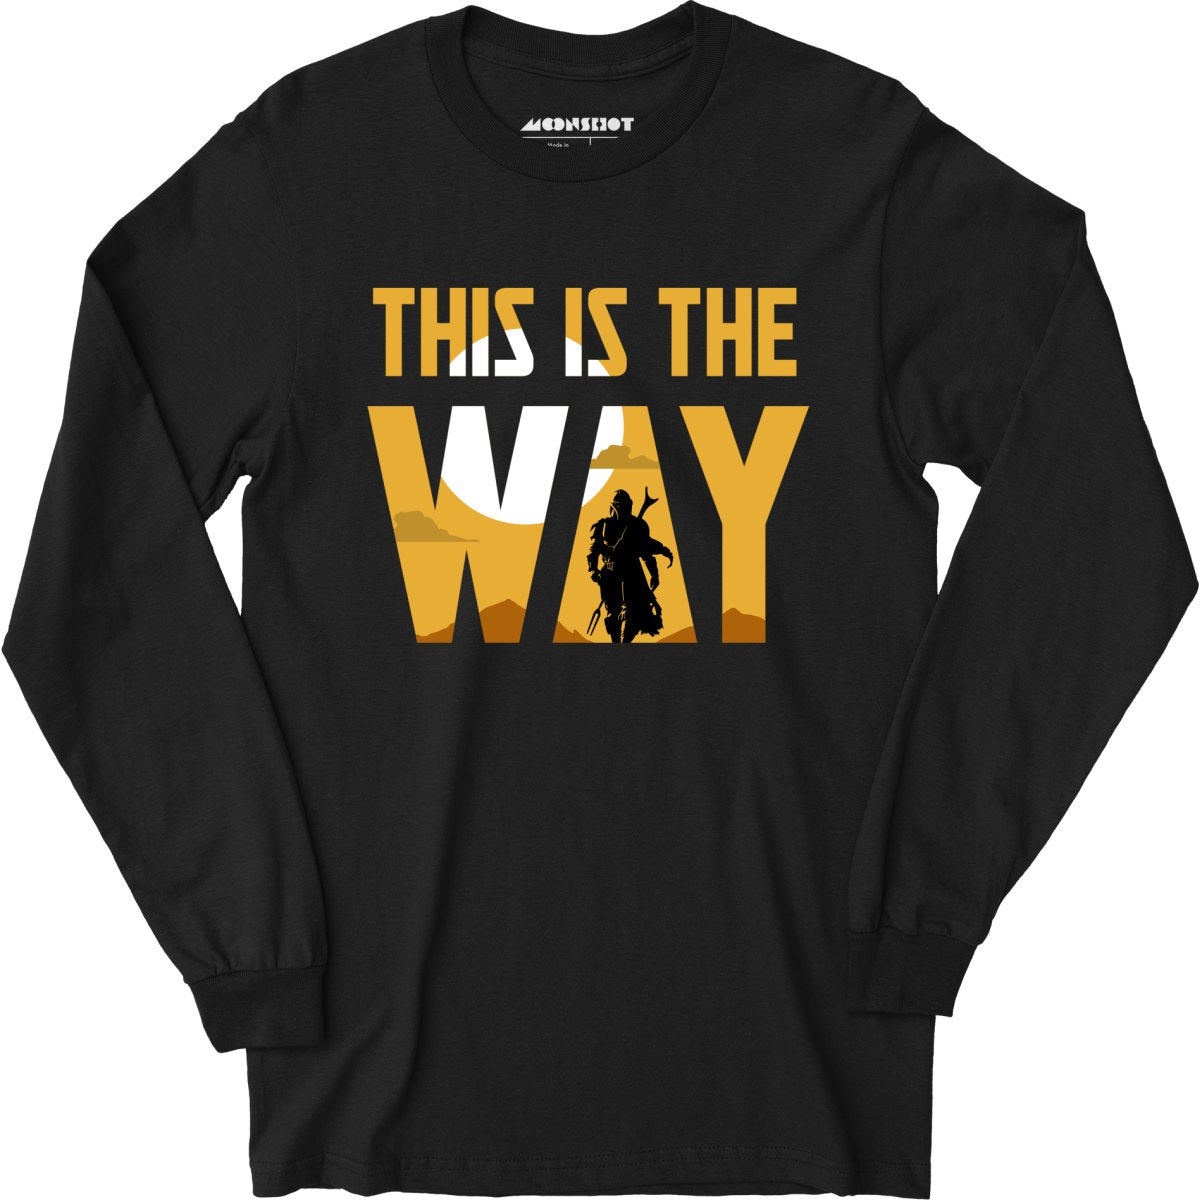 This is The Way - Long Sleeve T-Shirt